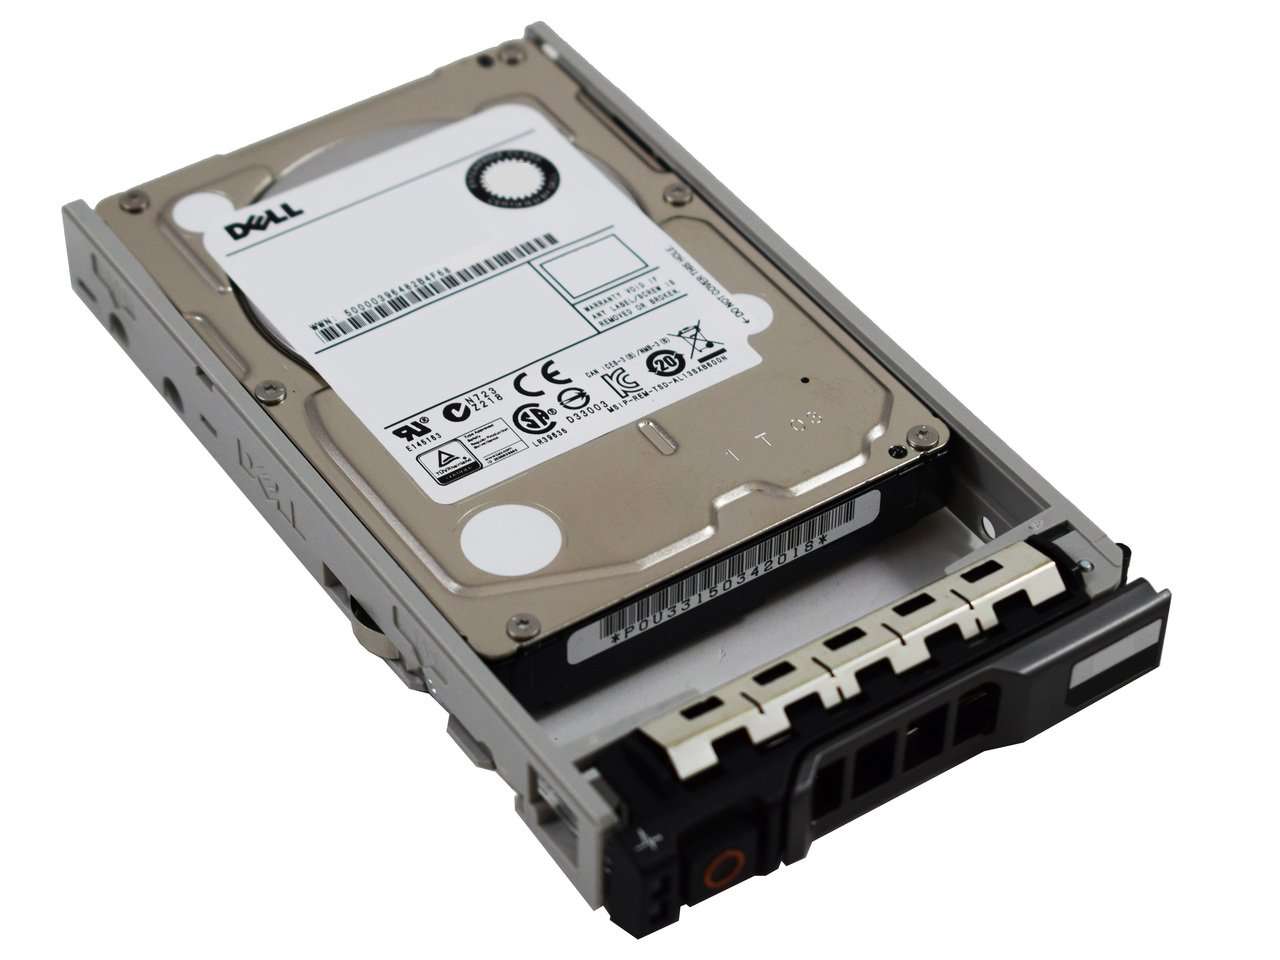 Dell G13 400-25626 600GB 10K RPM SAS 6Gb/s 512n 2.5" Manufacturer Recertified HDD